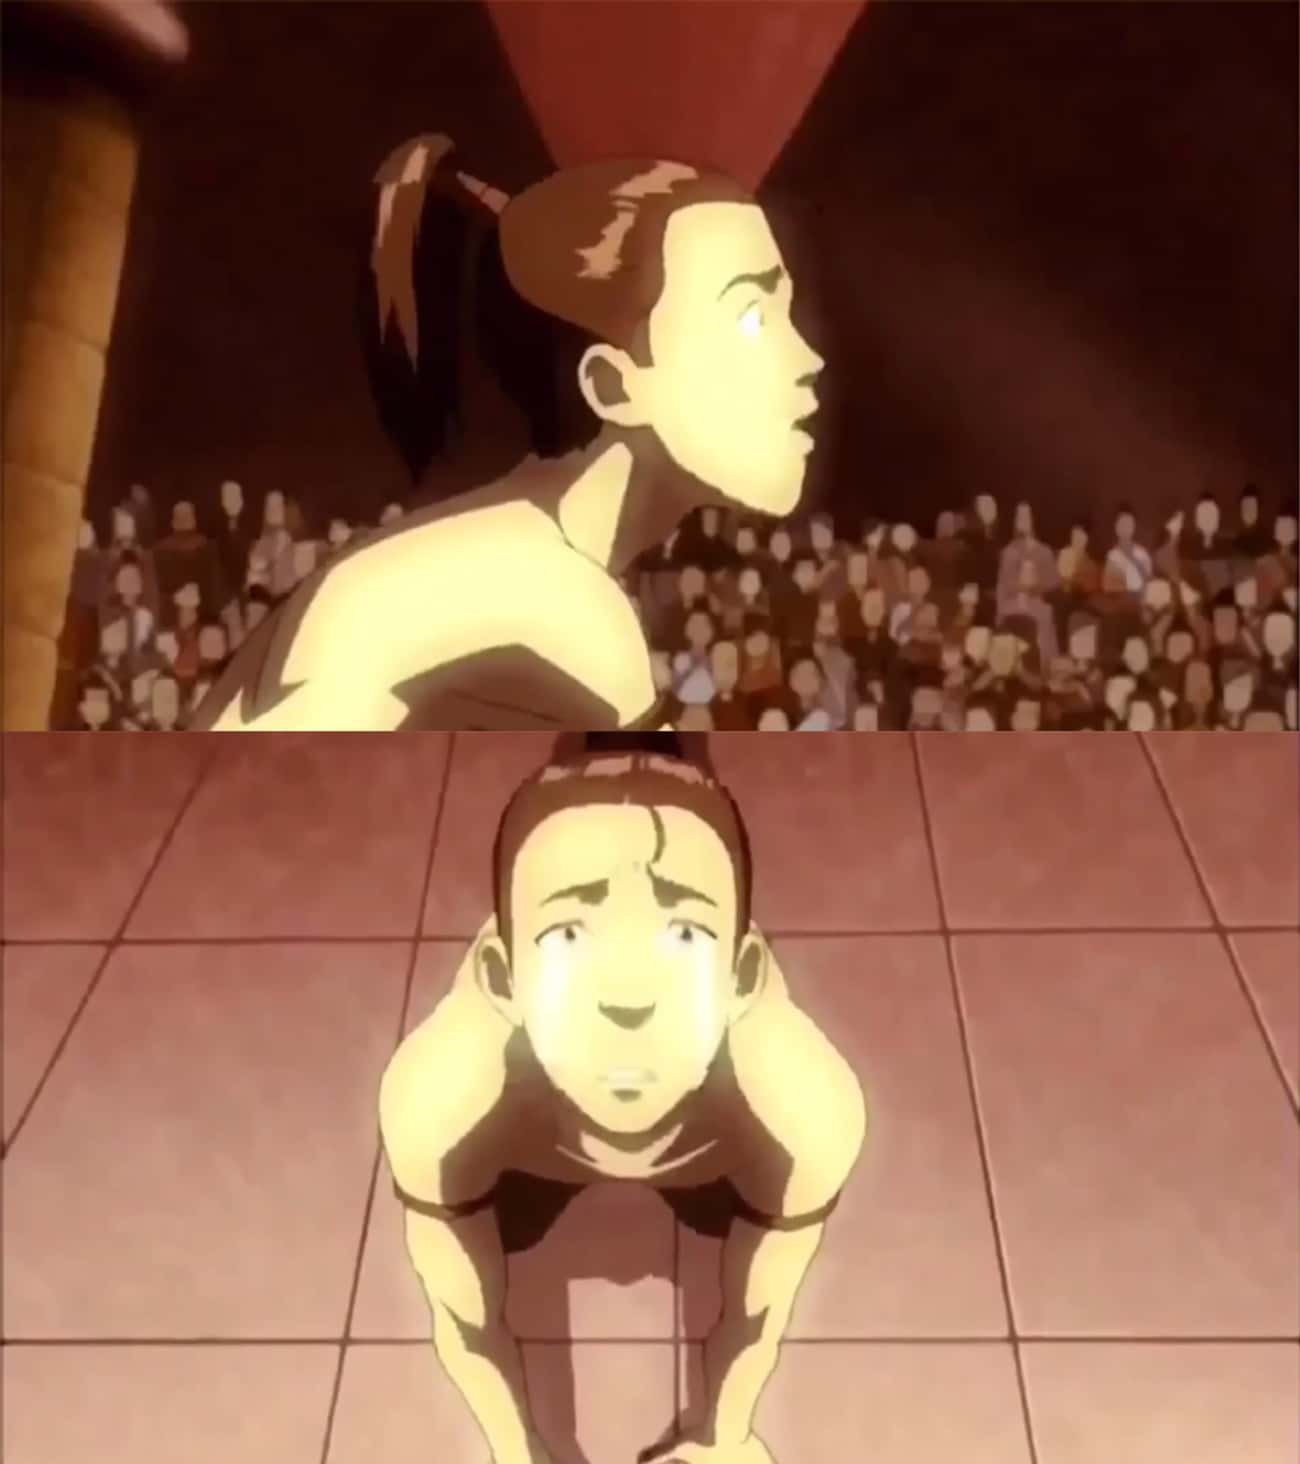 This Look On Zuko's Face (Who Was Thirteen Years Old At The Time) Before His Father Burned His Left Eye